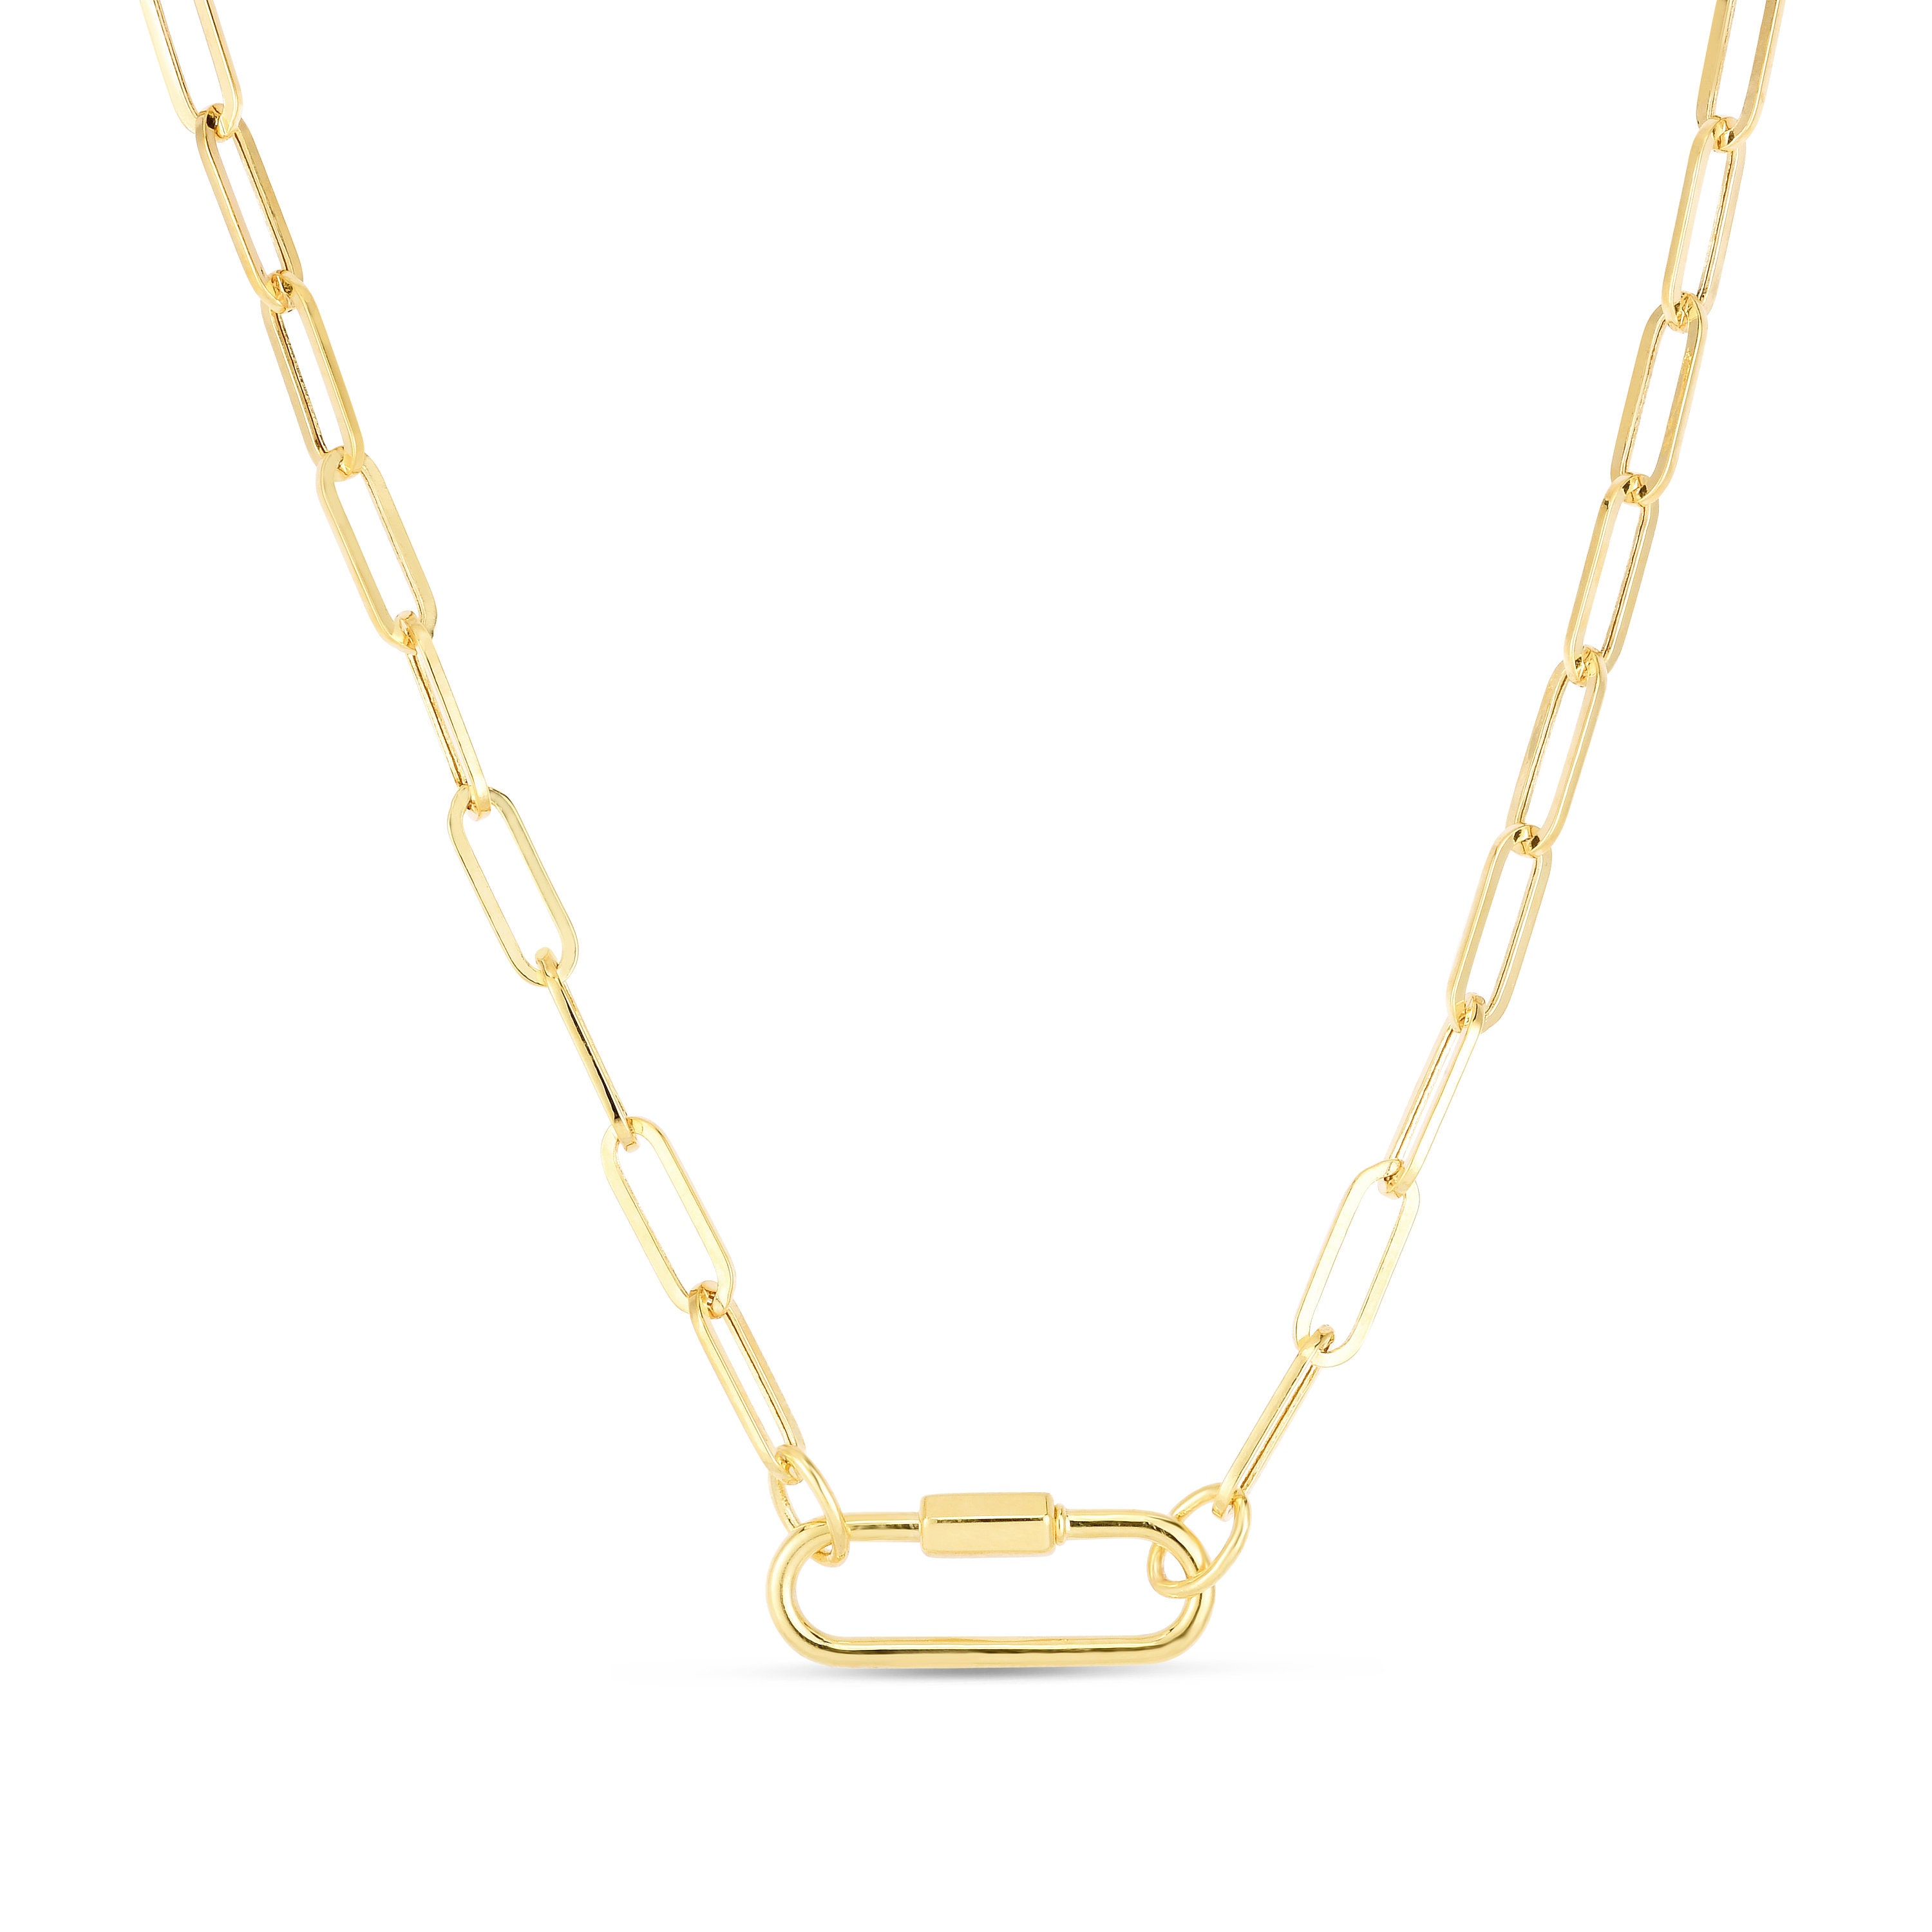 14K Solid Yellow Gold Paper Clip Finish Necklace w/ Star Carabiner Clasp,  6x18.5 mm, (14k-2.8x8(13))